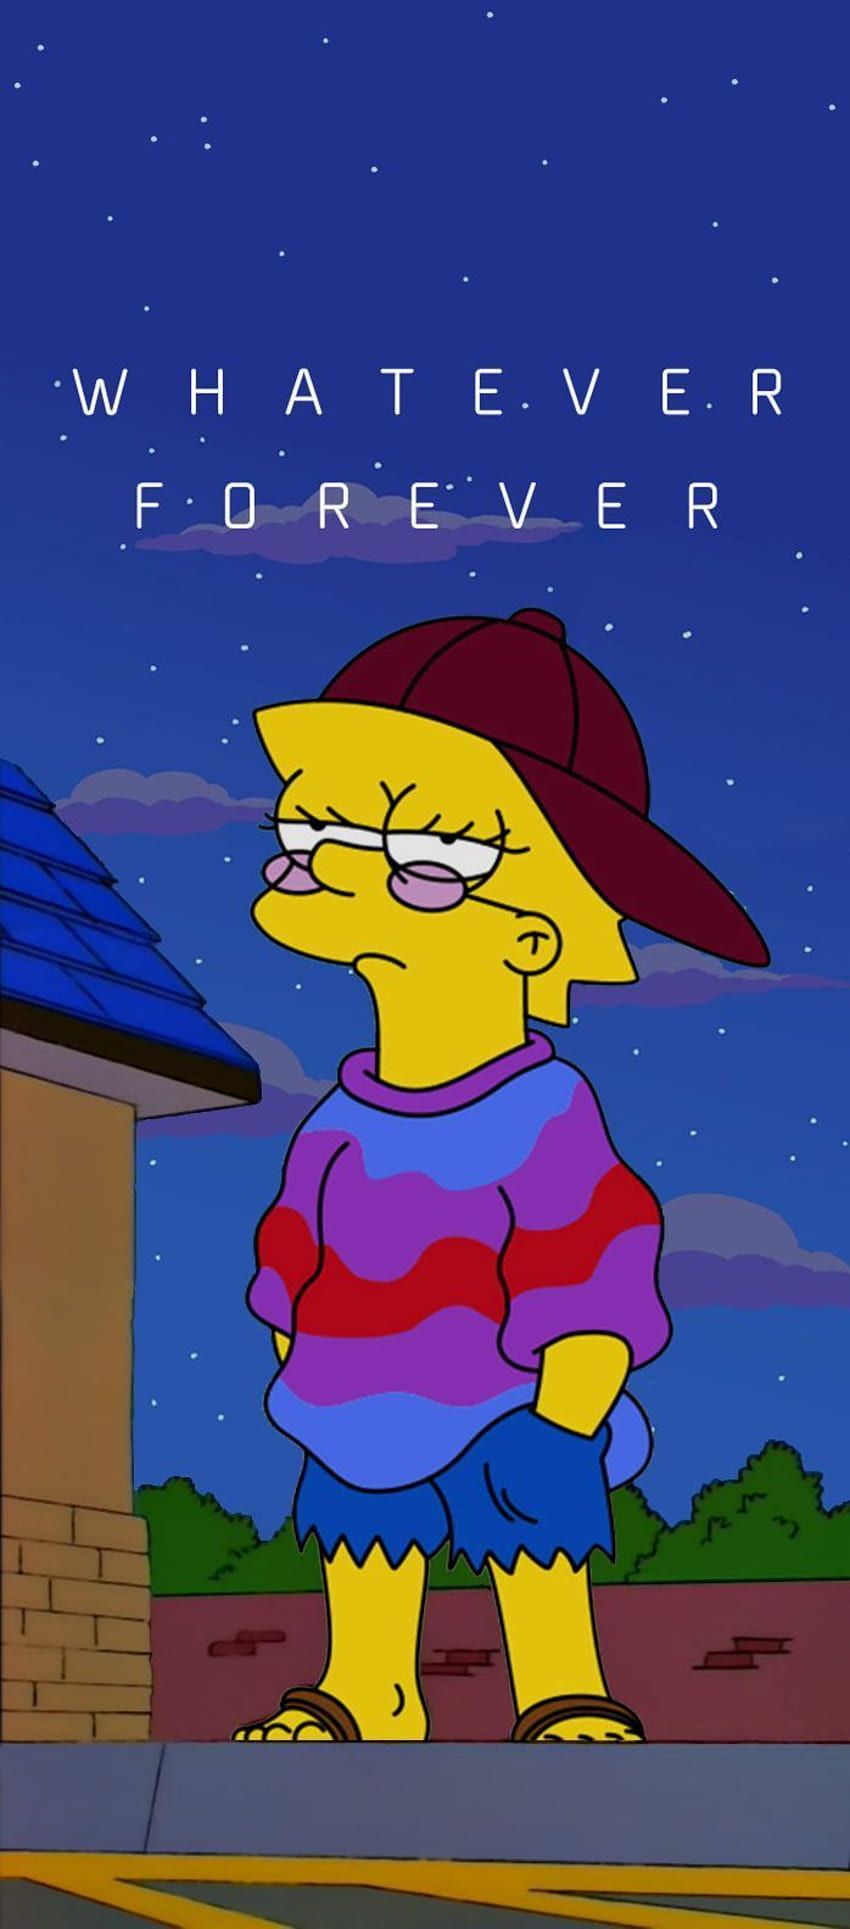 Lisa Simpson wearing a hat and sweater with the words whatever forever - Lisa Simpson, The Simpsons